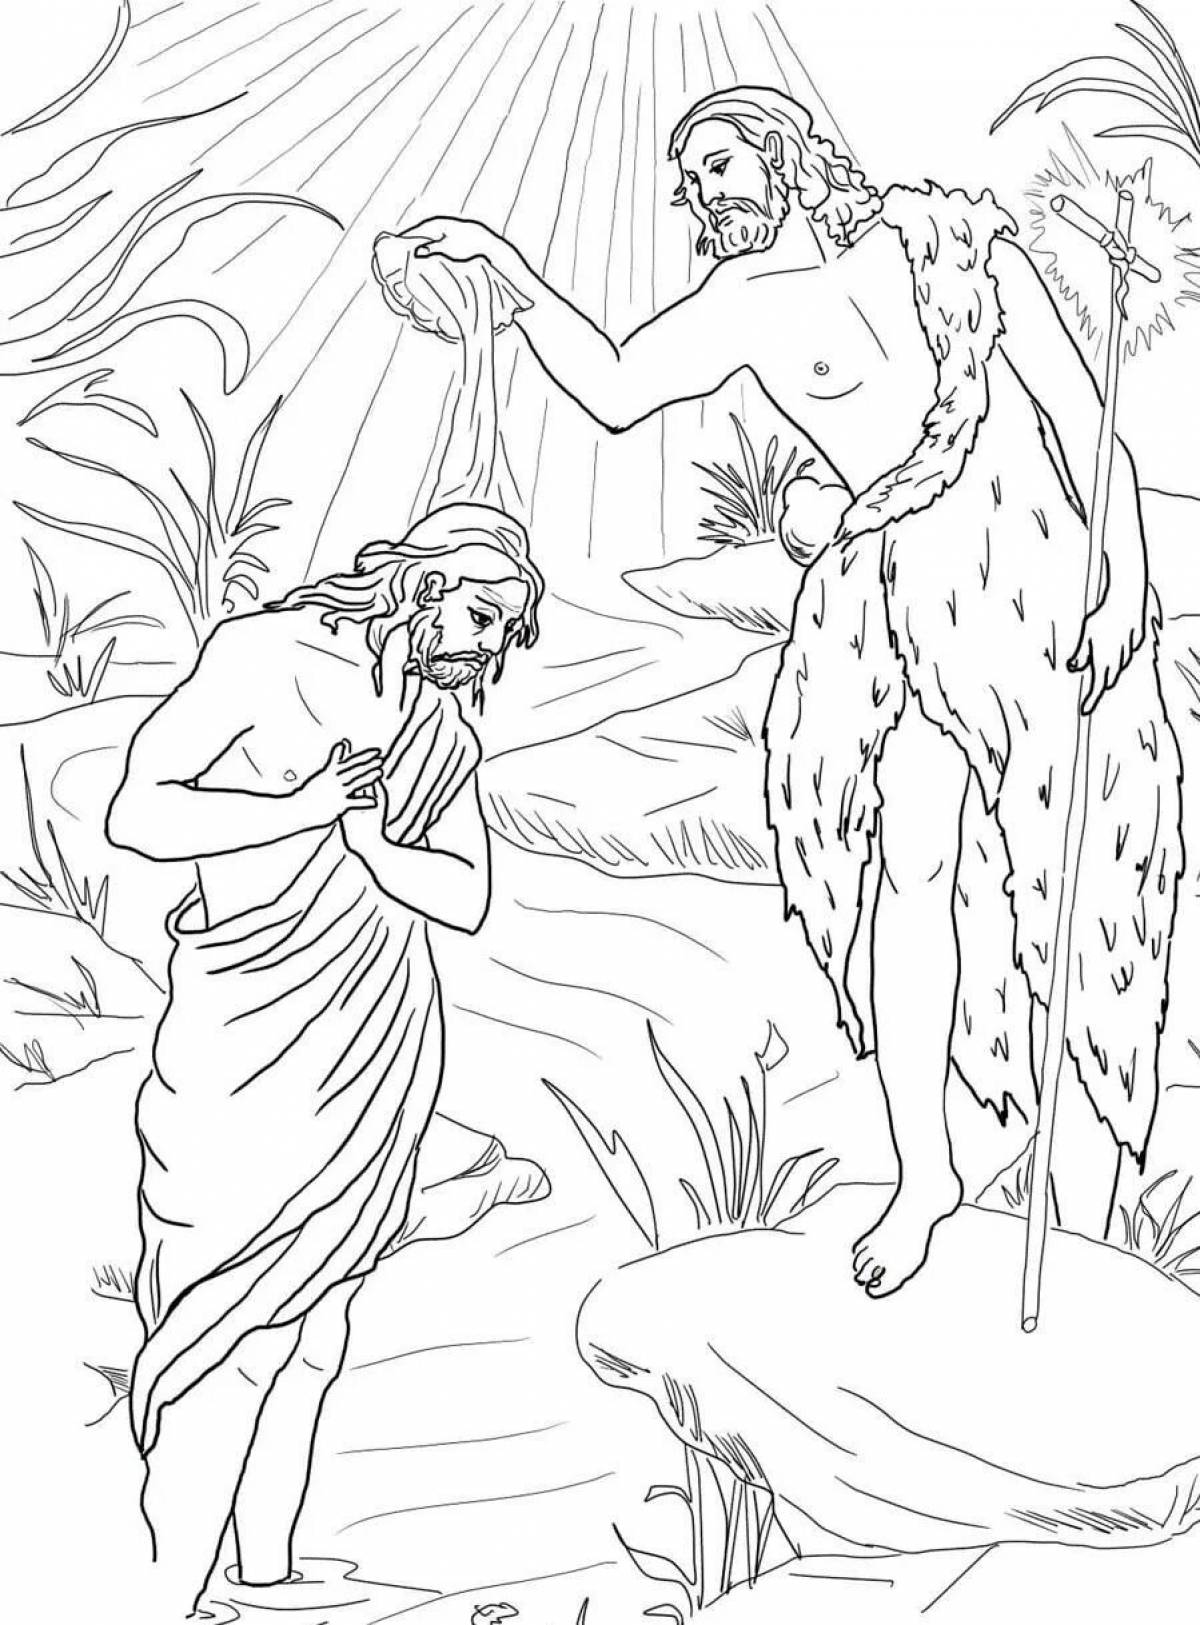 Colorful jesus baptism coloring page